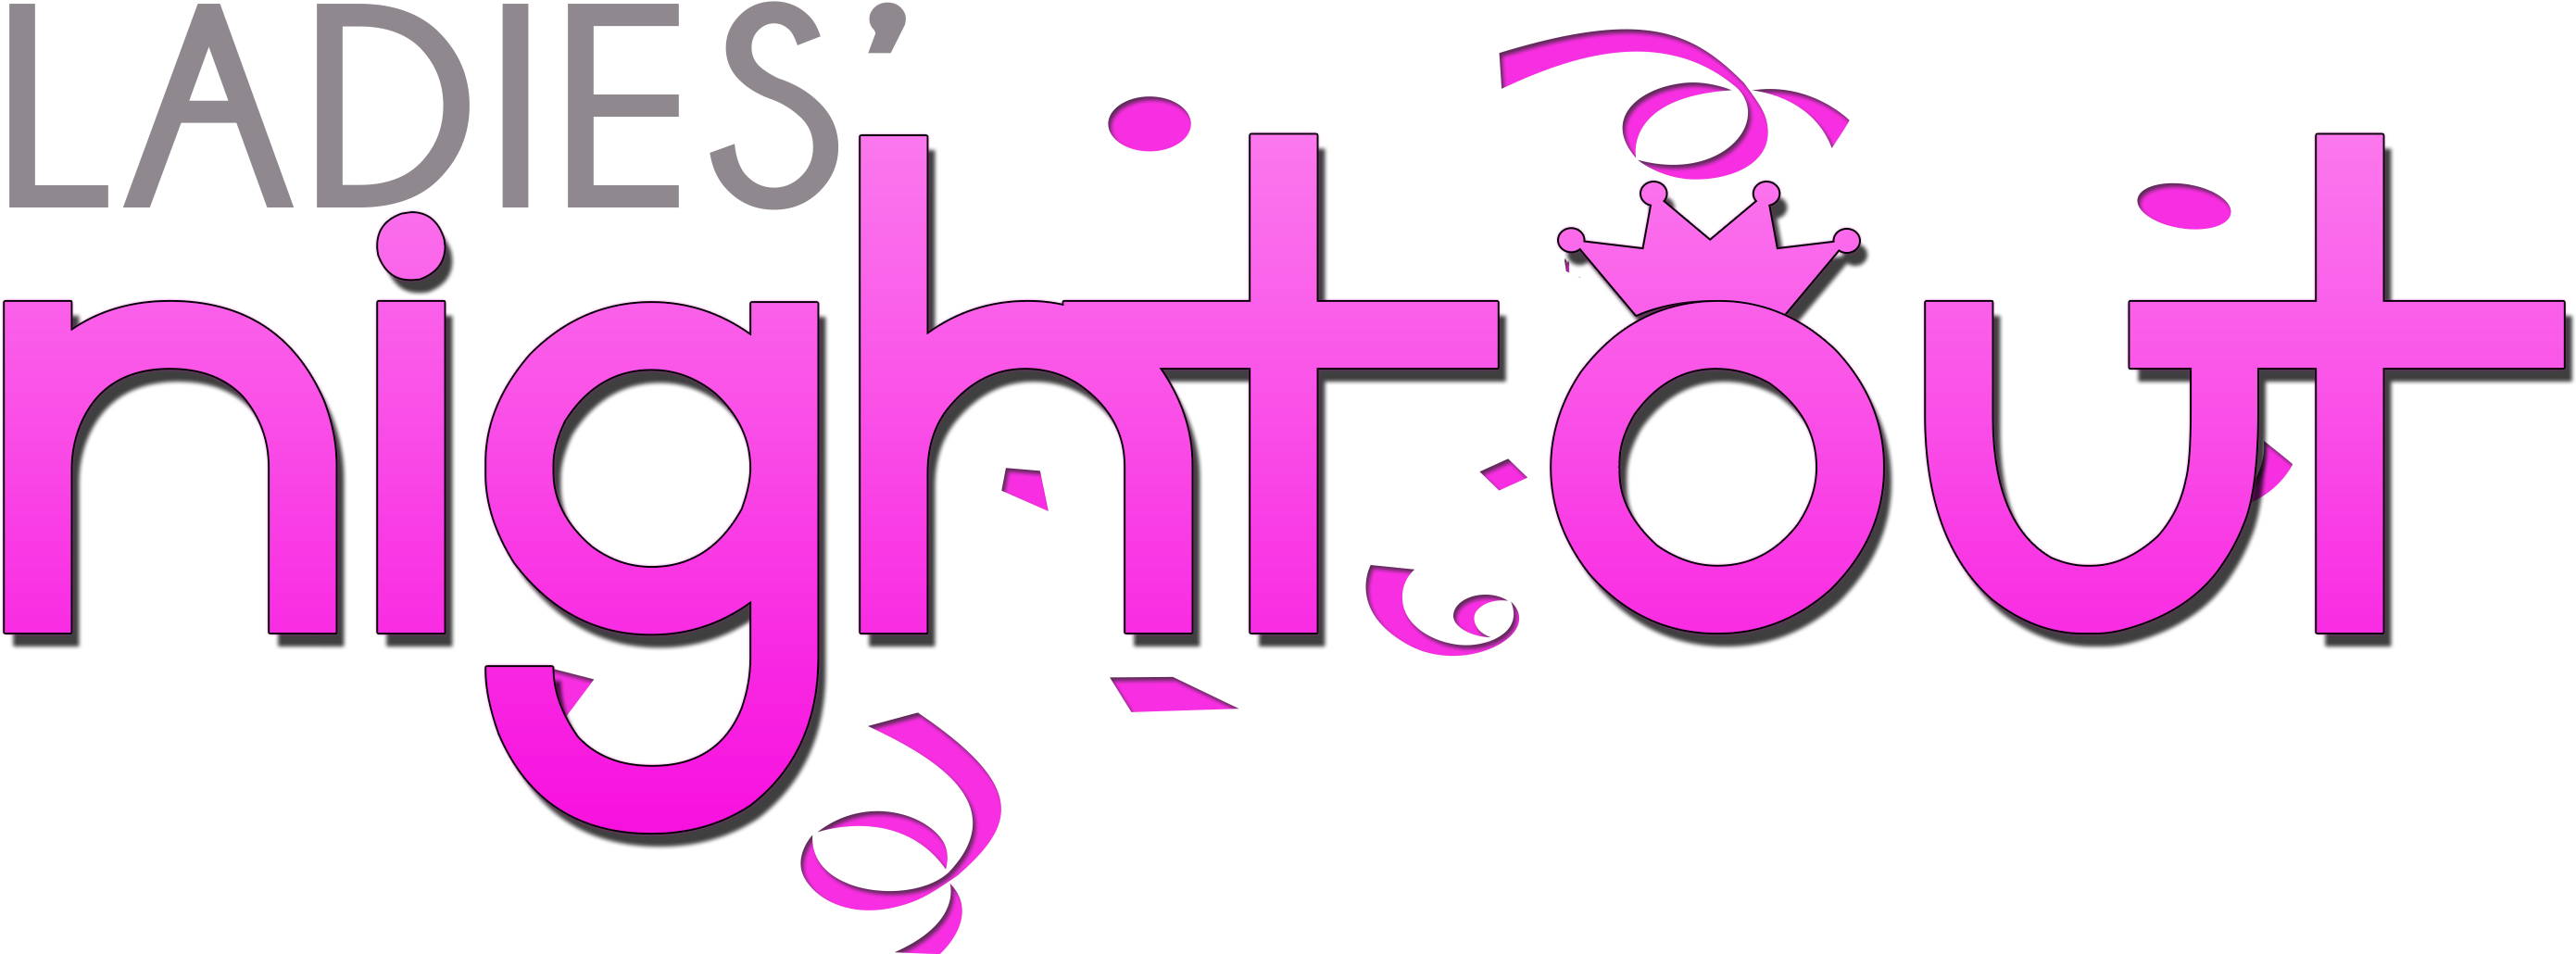 Girls - Ladies Night Out Salon (2827x1089), Png Download